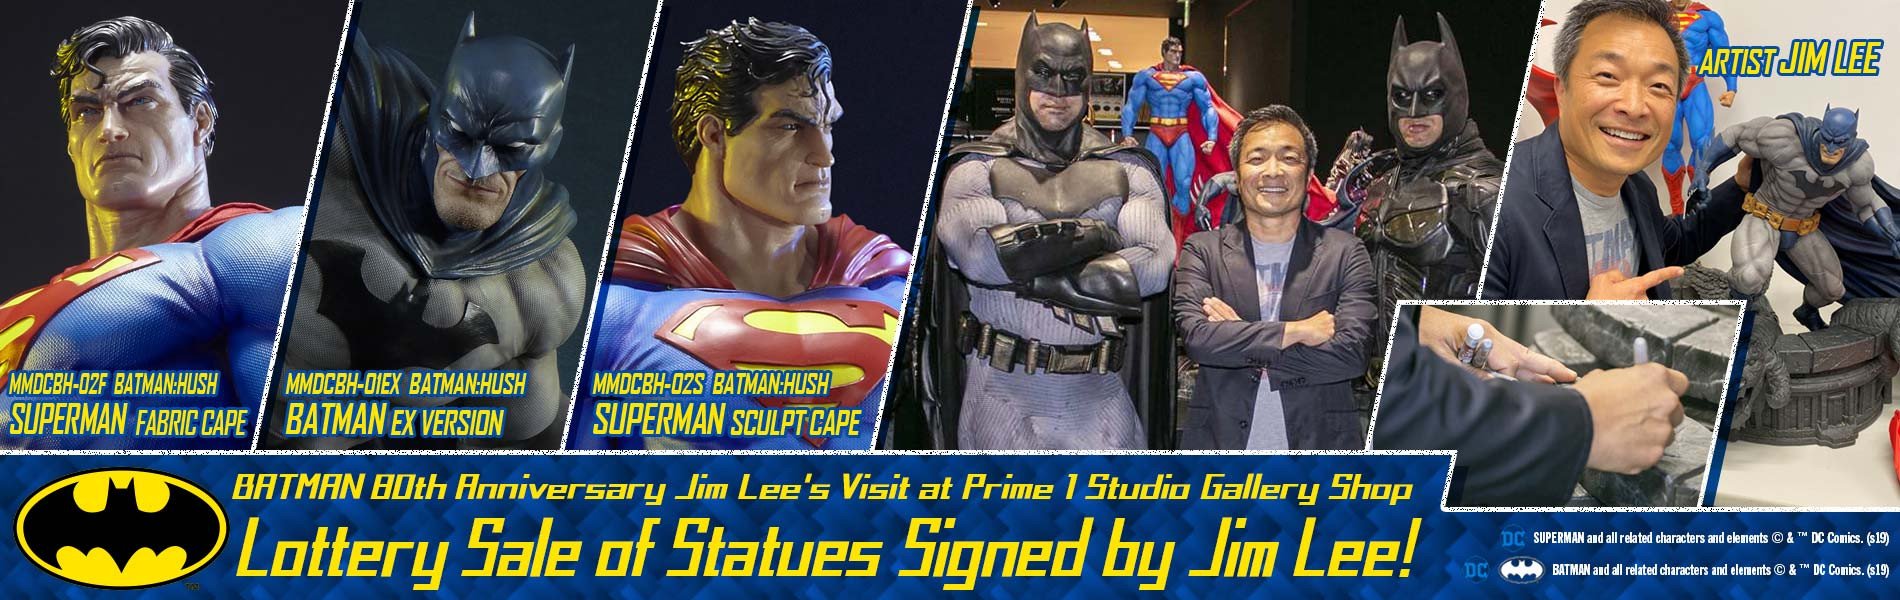 Lottery Sale of Statues Signed by Jim Lee is OPEN